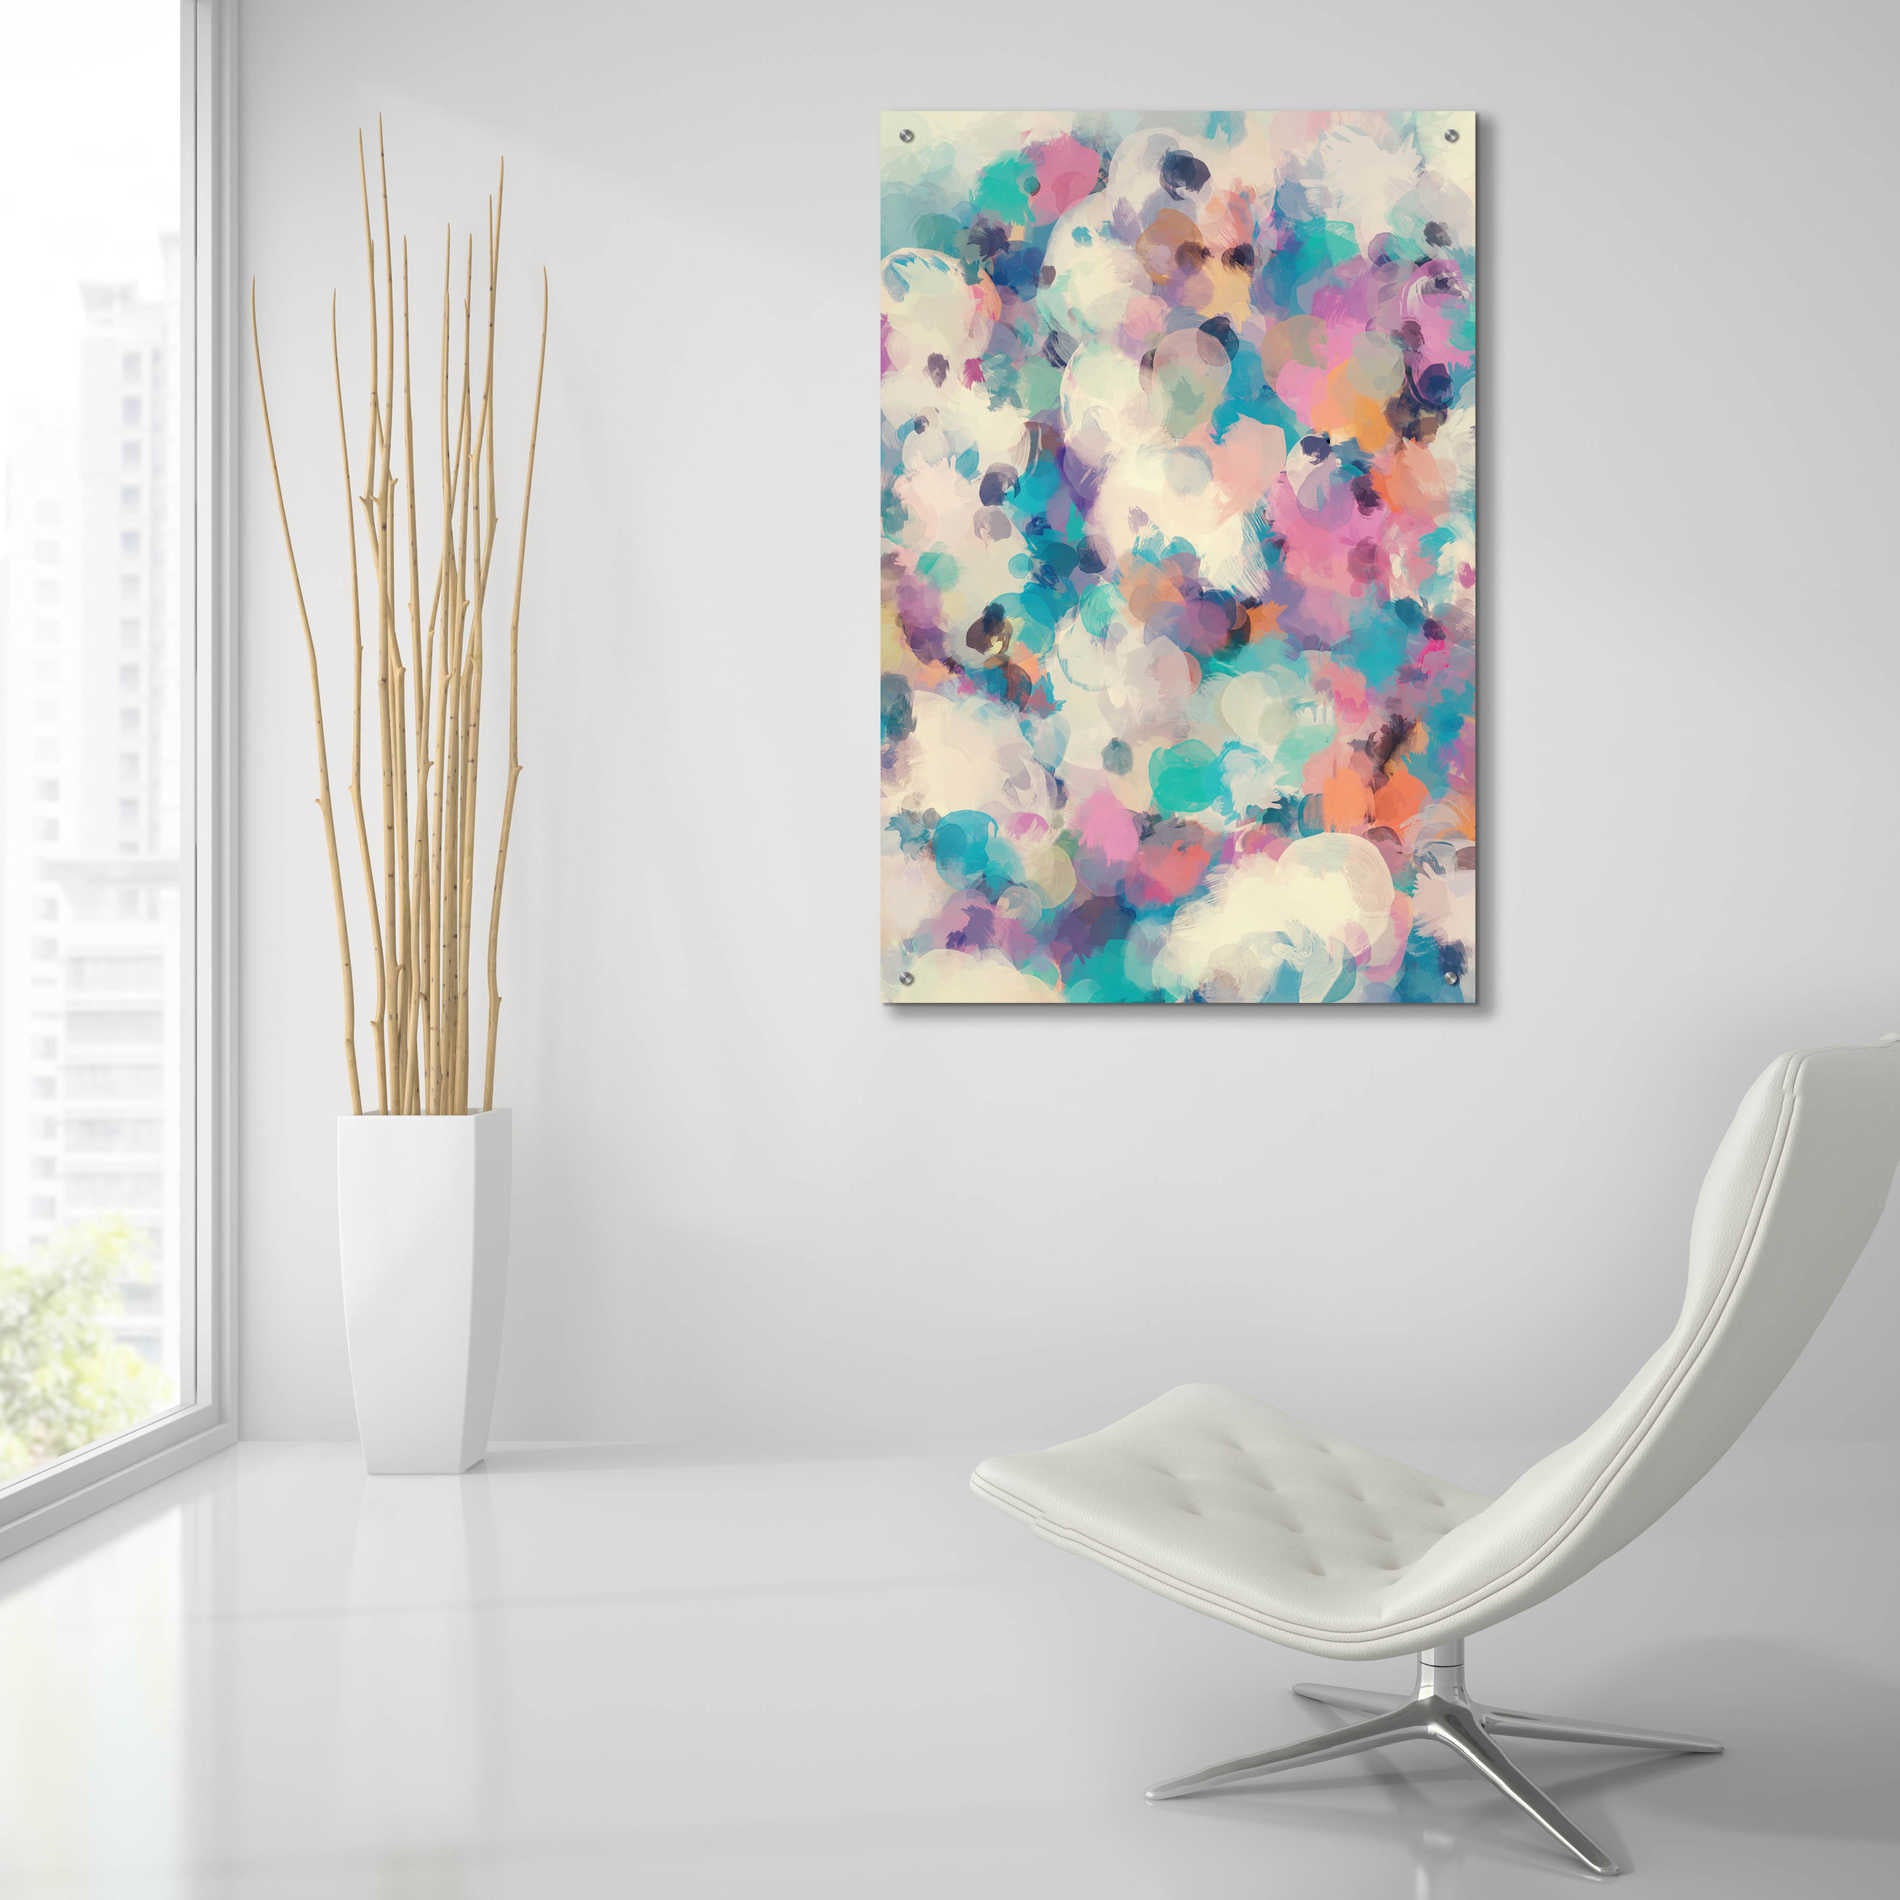 Epic Art 'Abstract Colorful Flows 5' by Irena Orlov Acrylic Glass Wall Art,24x36